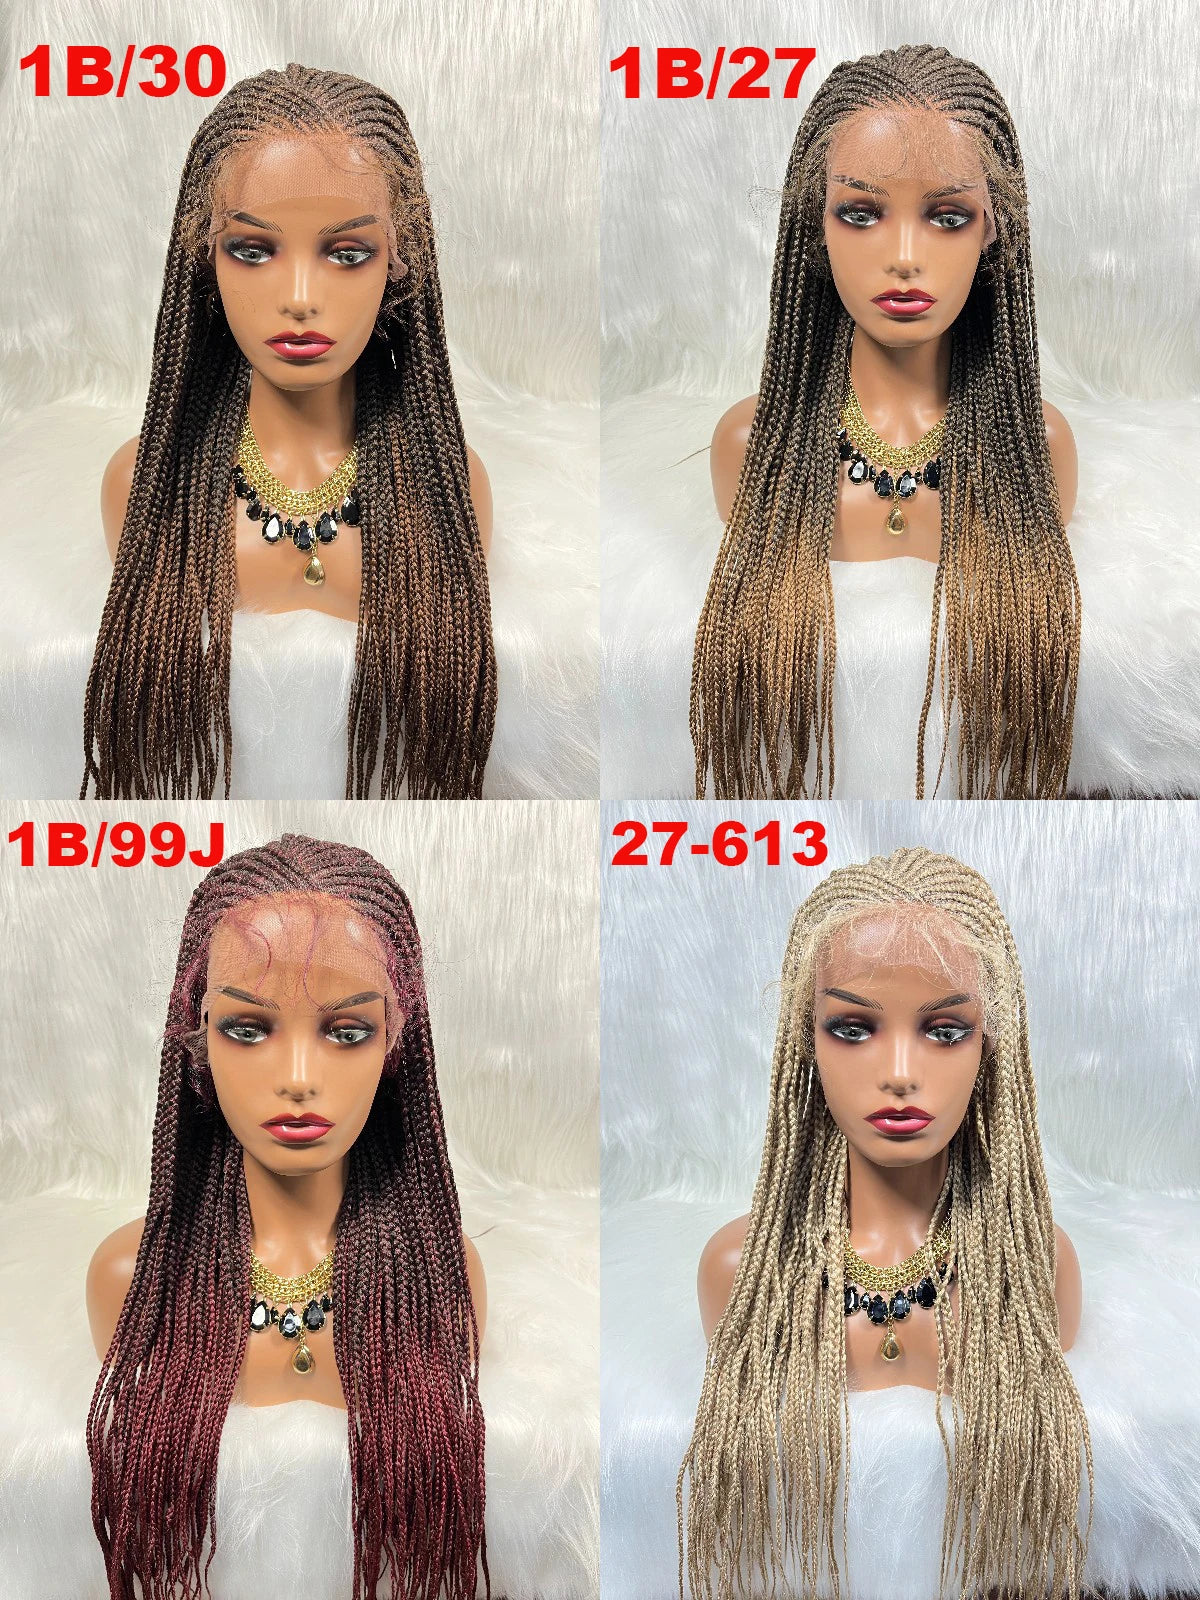 Cornrow Box Braided Wig, Lace Frontal Wig with Baby Hair, 24 inches